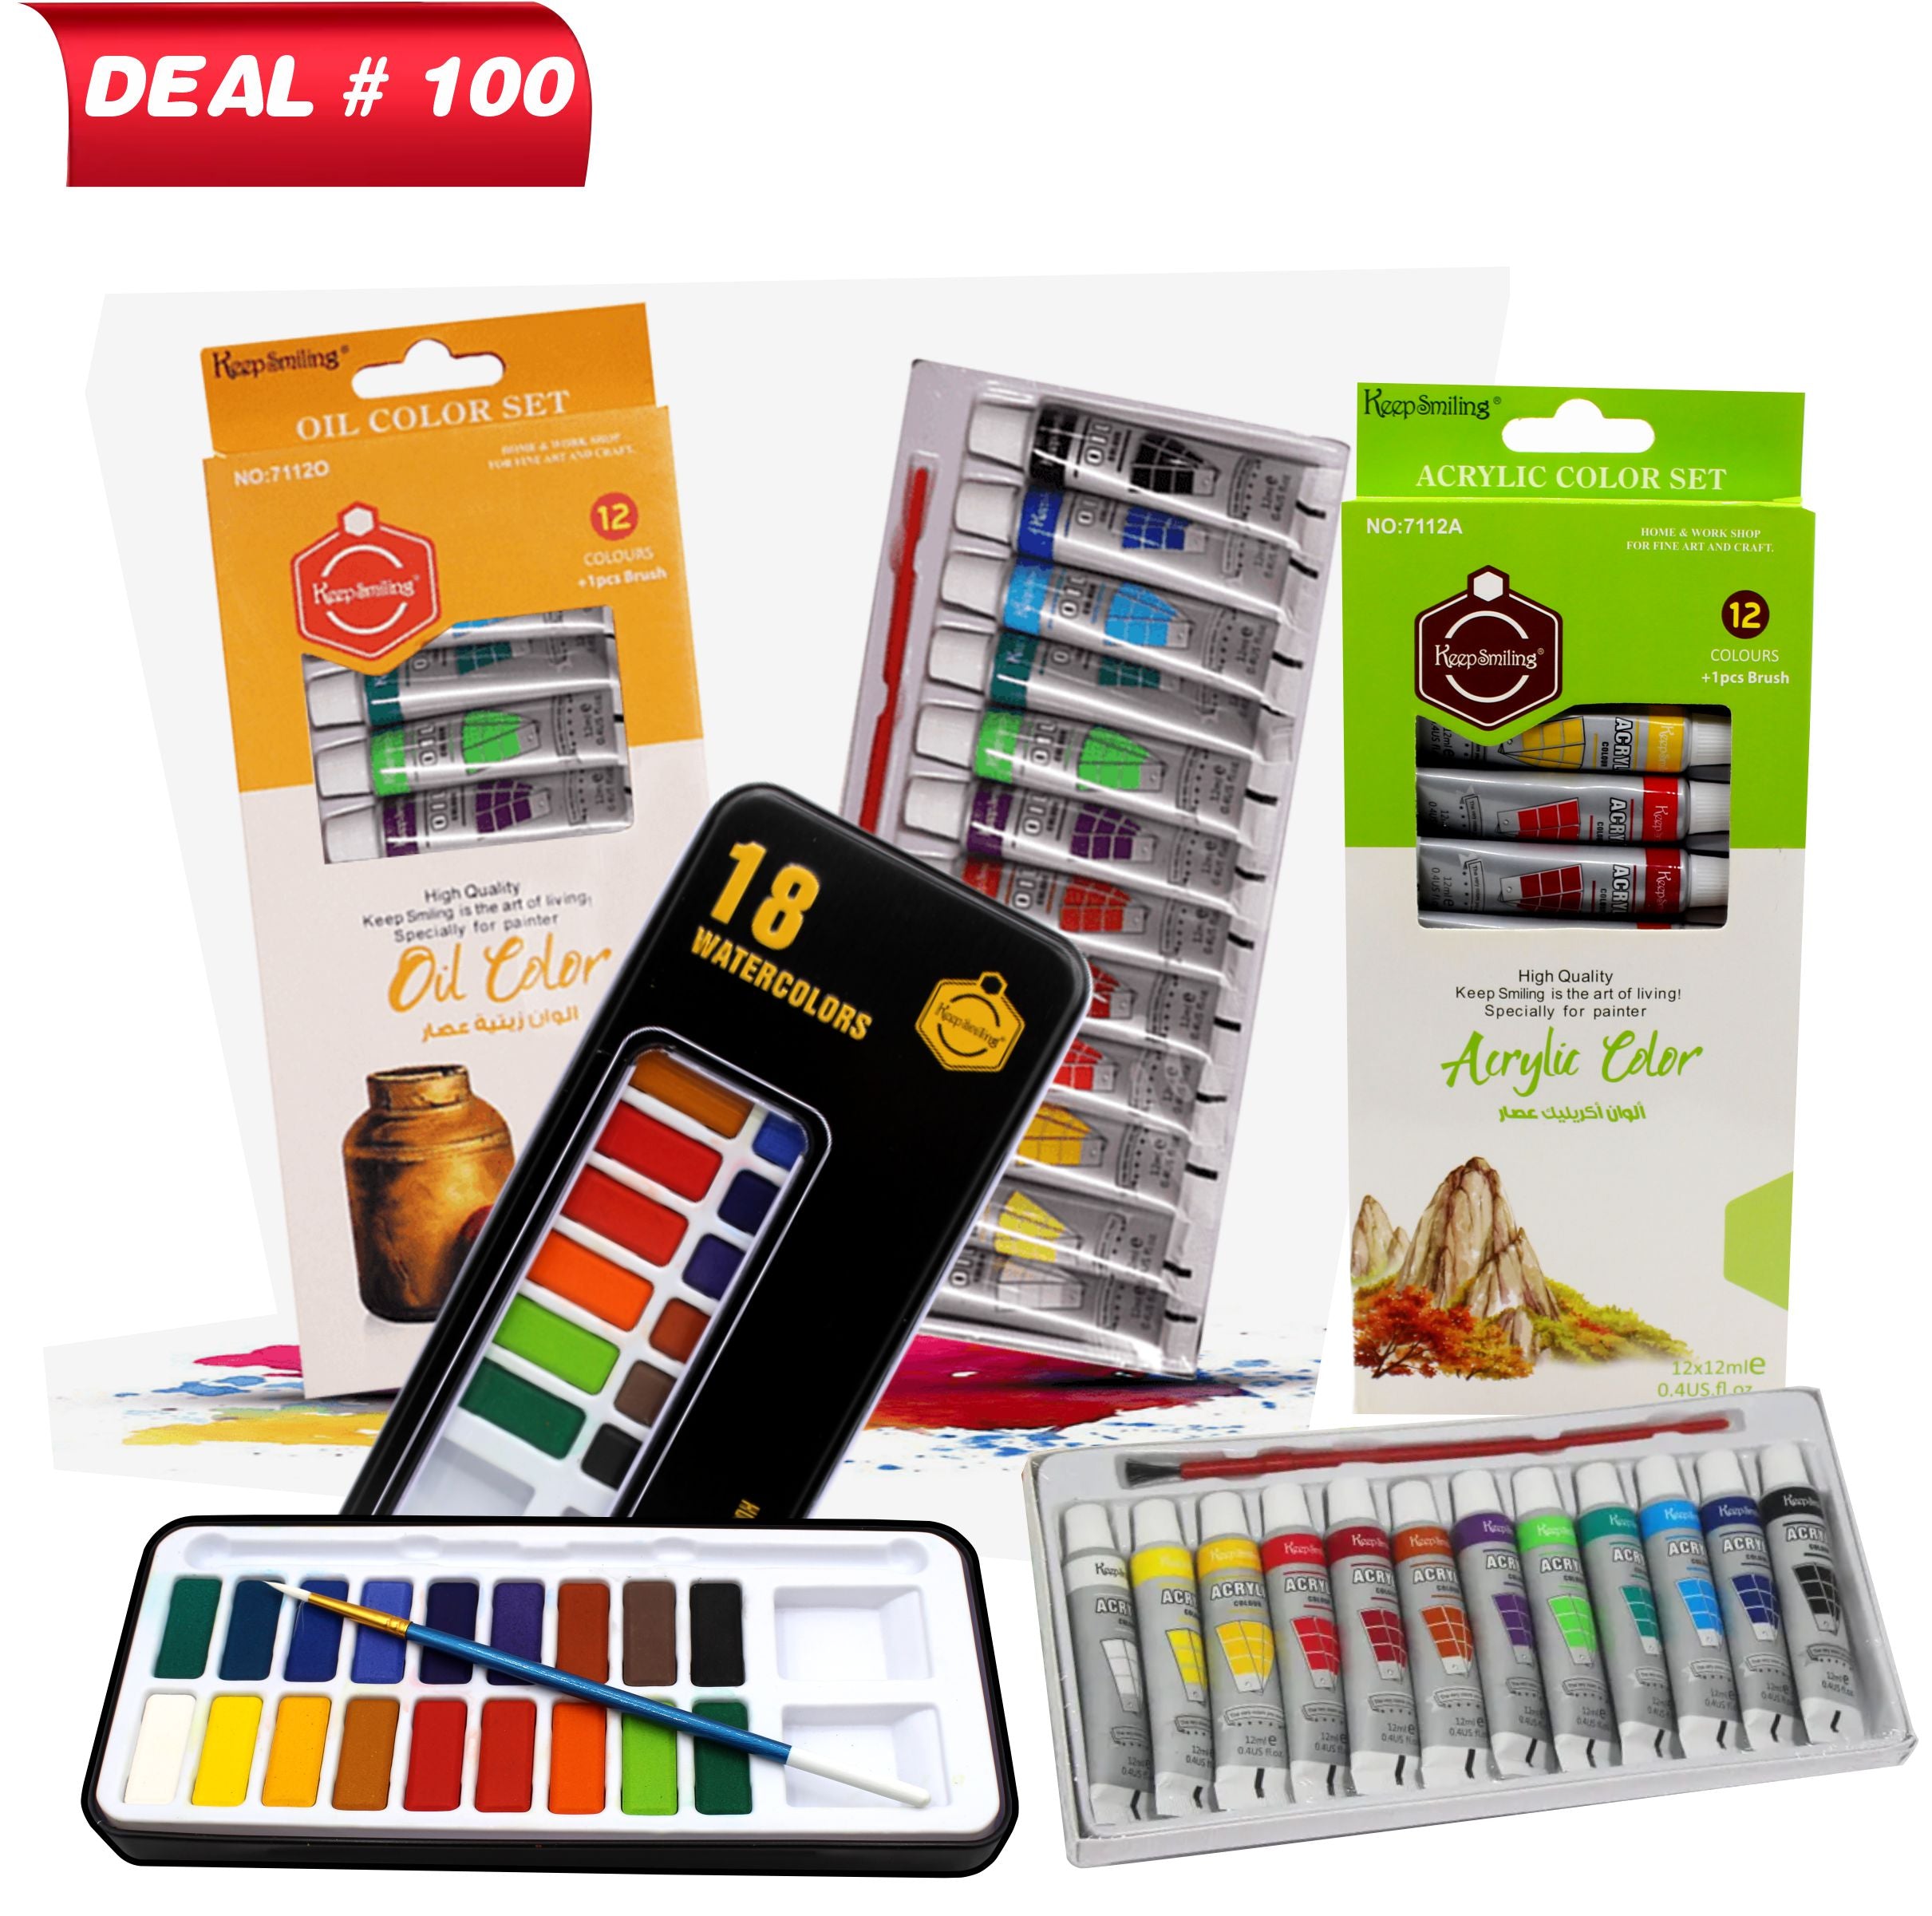 Keep Smiling Painting Deals For Beginners, Deal No.100